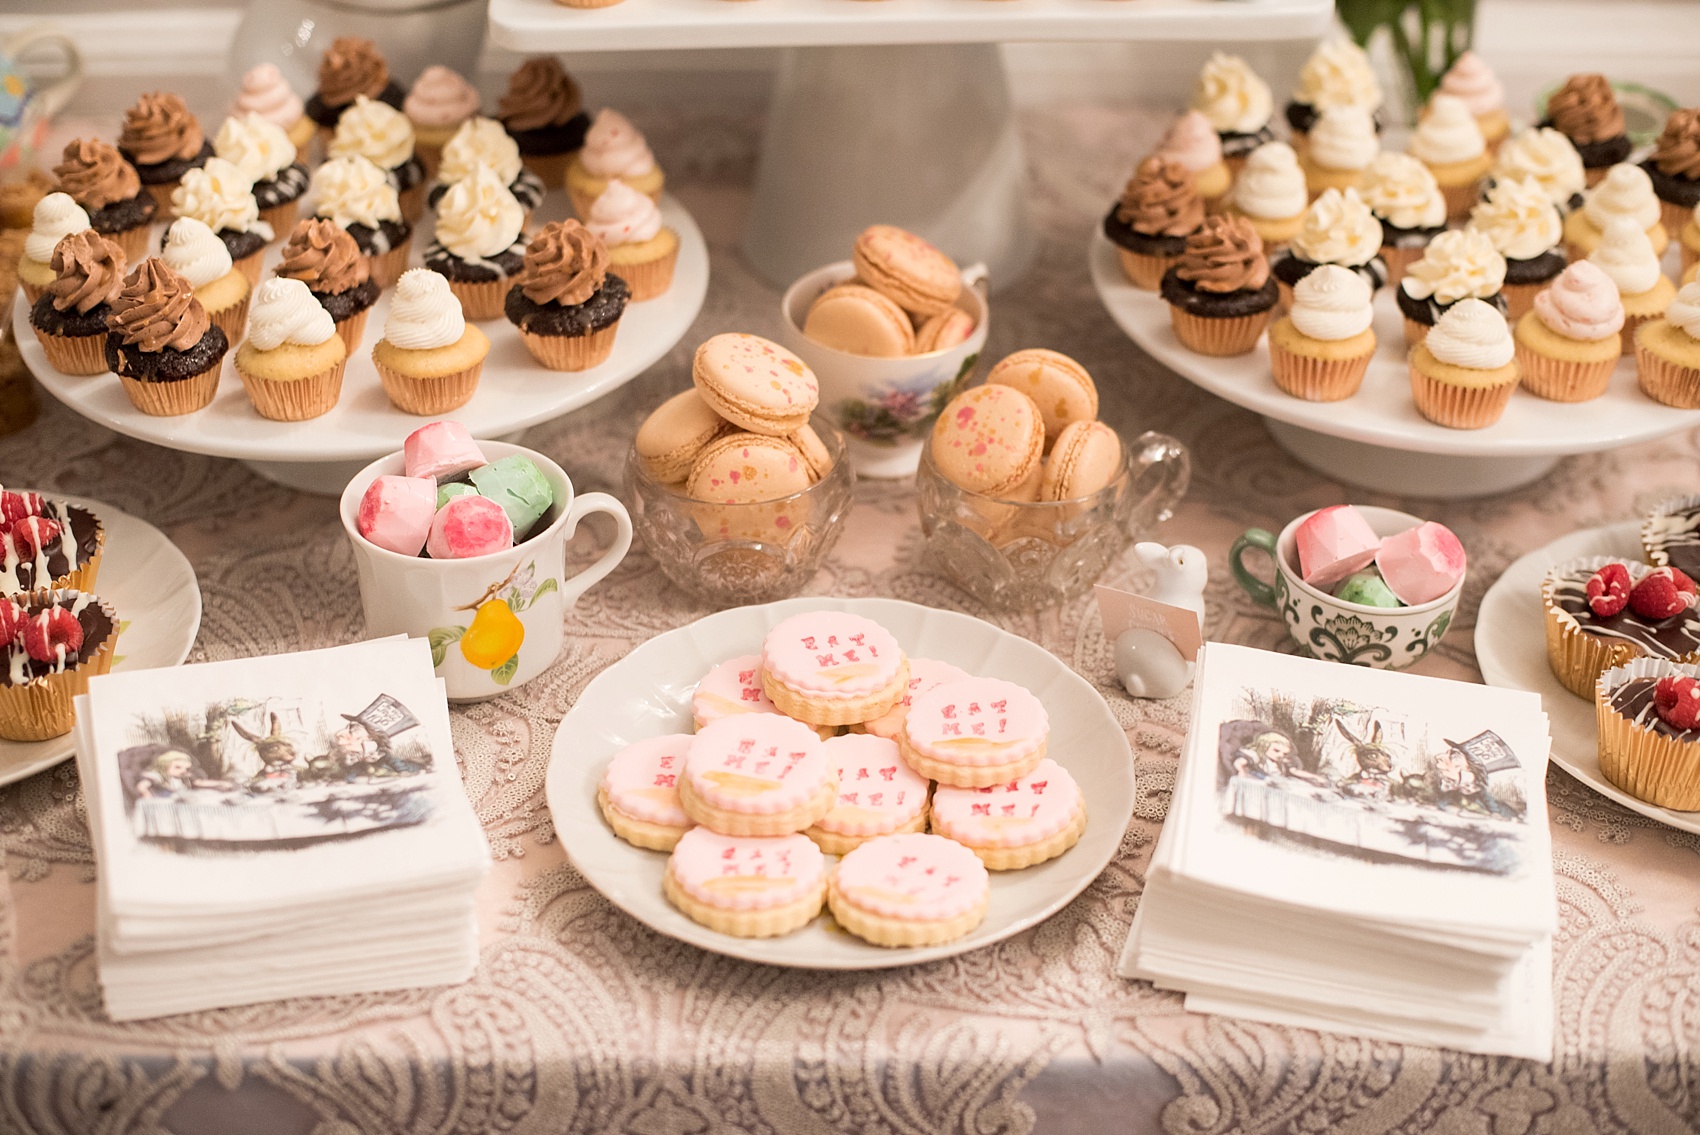 Raleigh wedding photographer Mikkel Paige captures Mim's House opening night, with an Alice in Wonderland theme and Eat Me cookies by Sugar Euphoria.